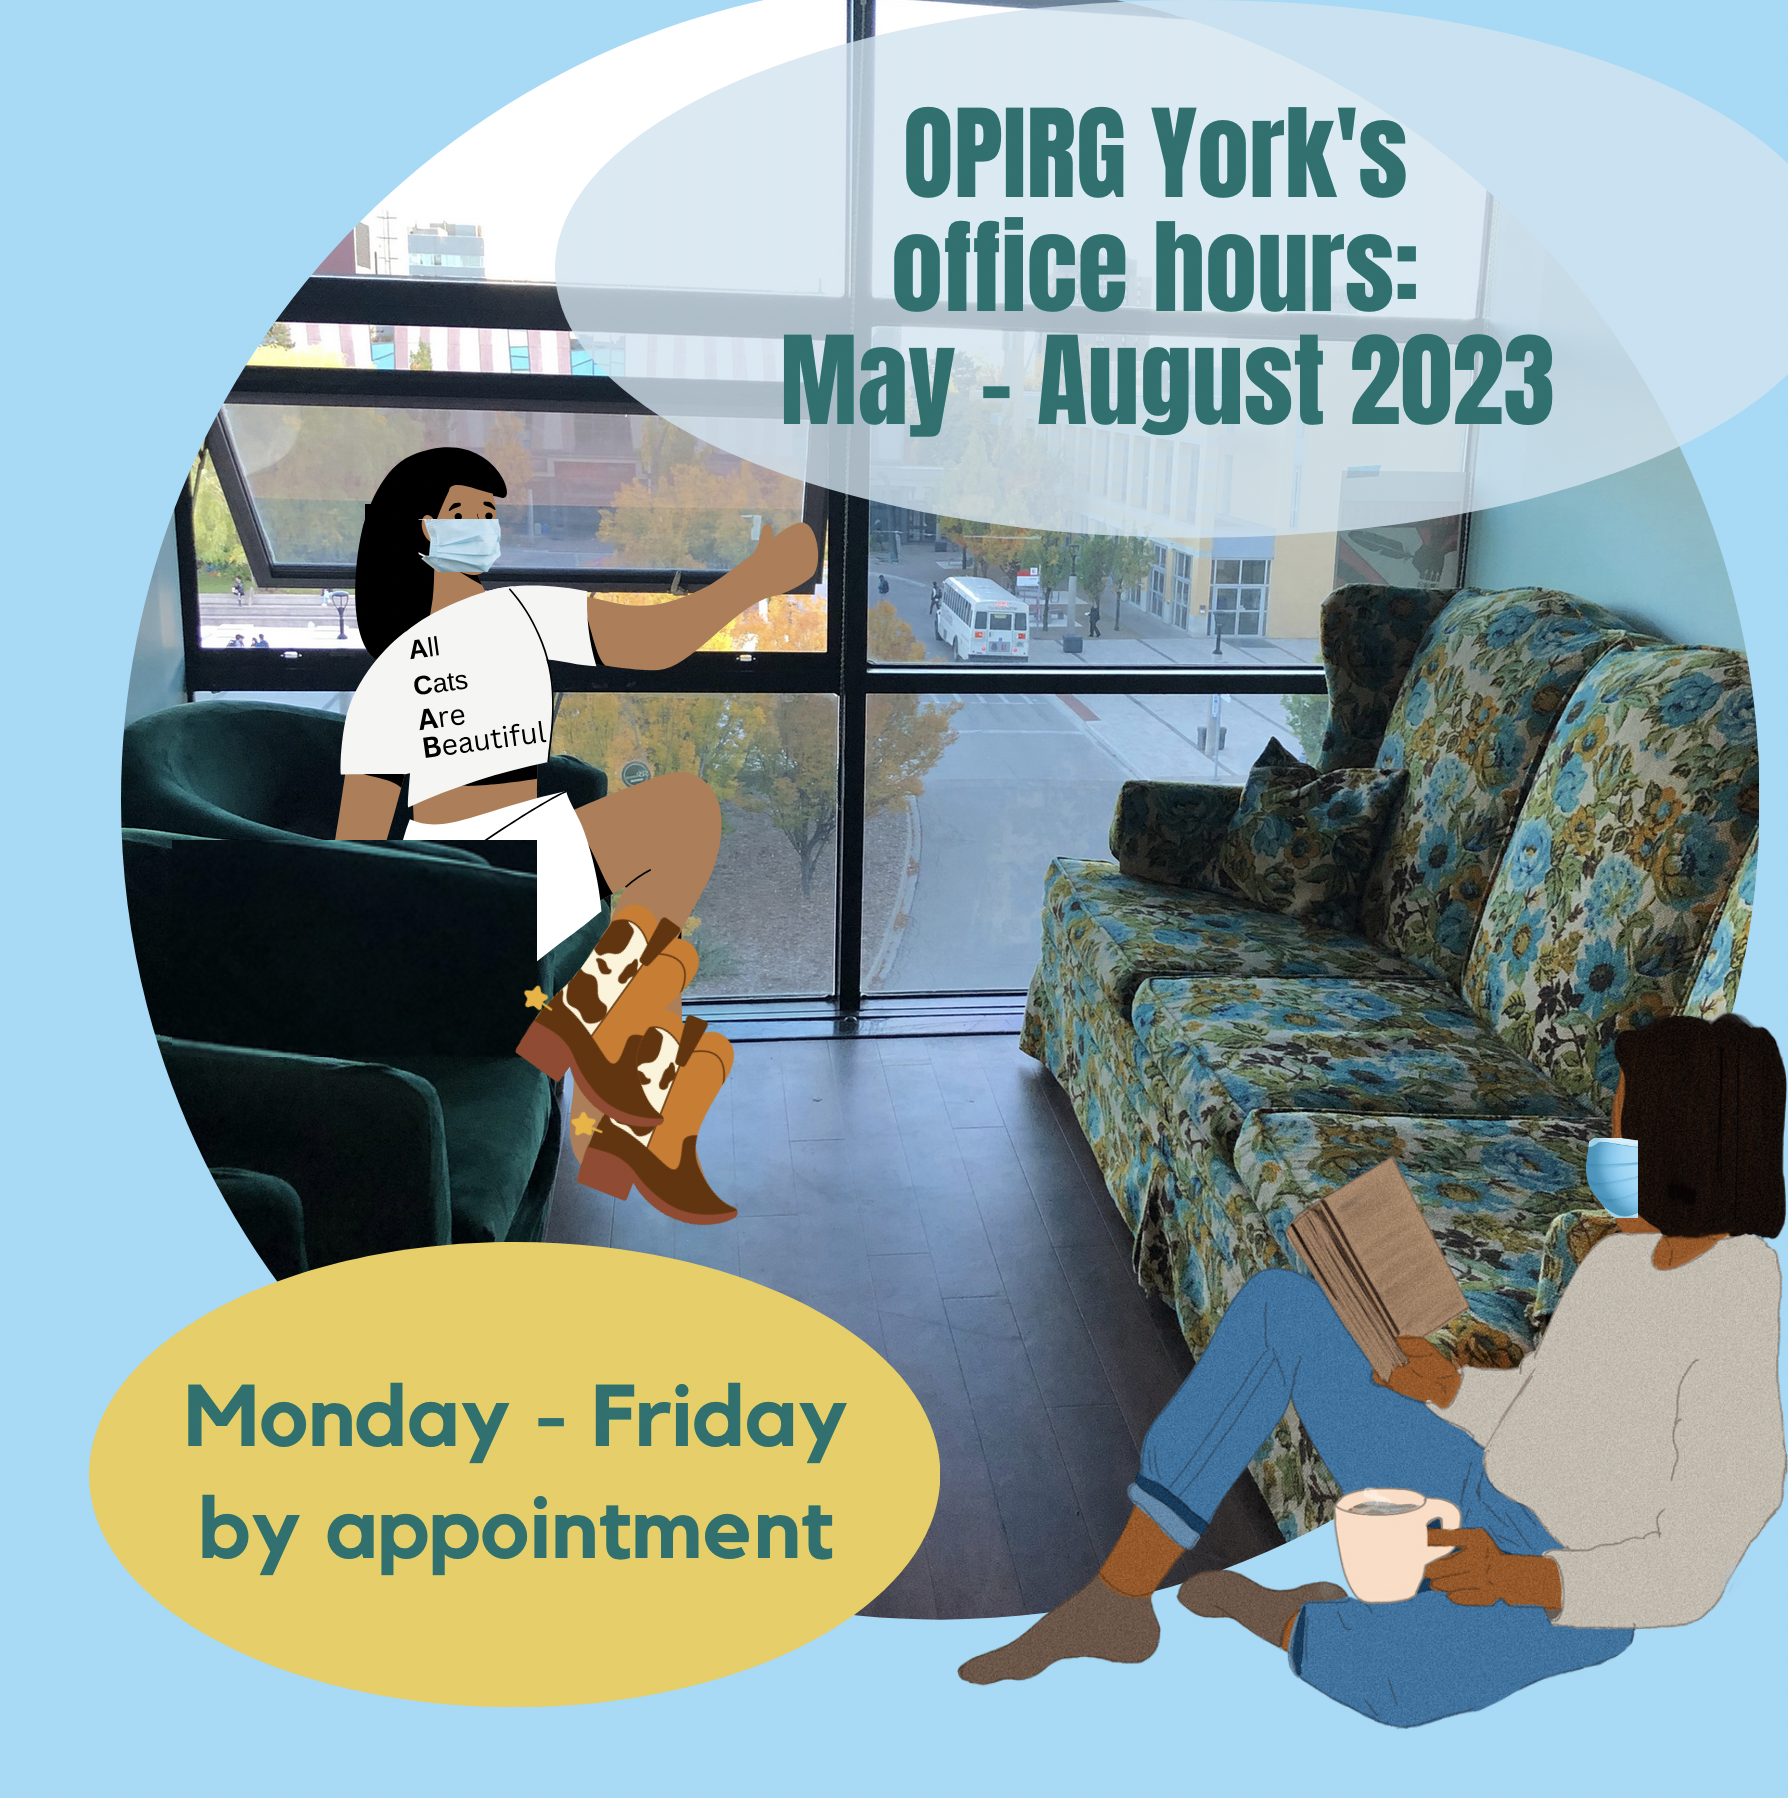 OPIRG York's office hours: May - August 2023 on a light blue background there is a circular image of the OPIRG York office: a floral couch, and green tub chairs. There are two cartoon people hanging out wearing masks for everyone’s health and safety. One is wearing an “All Cats Are Beautiful” Tshirt and cowboy boots; the other sits with a book and a coffee. To the left is the on a mustard yellow background with green text it reads: Monday - Friday by appointment